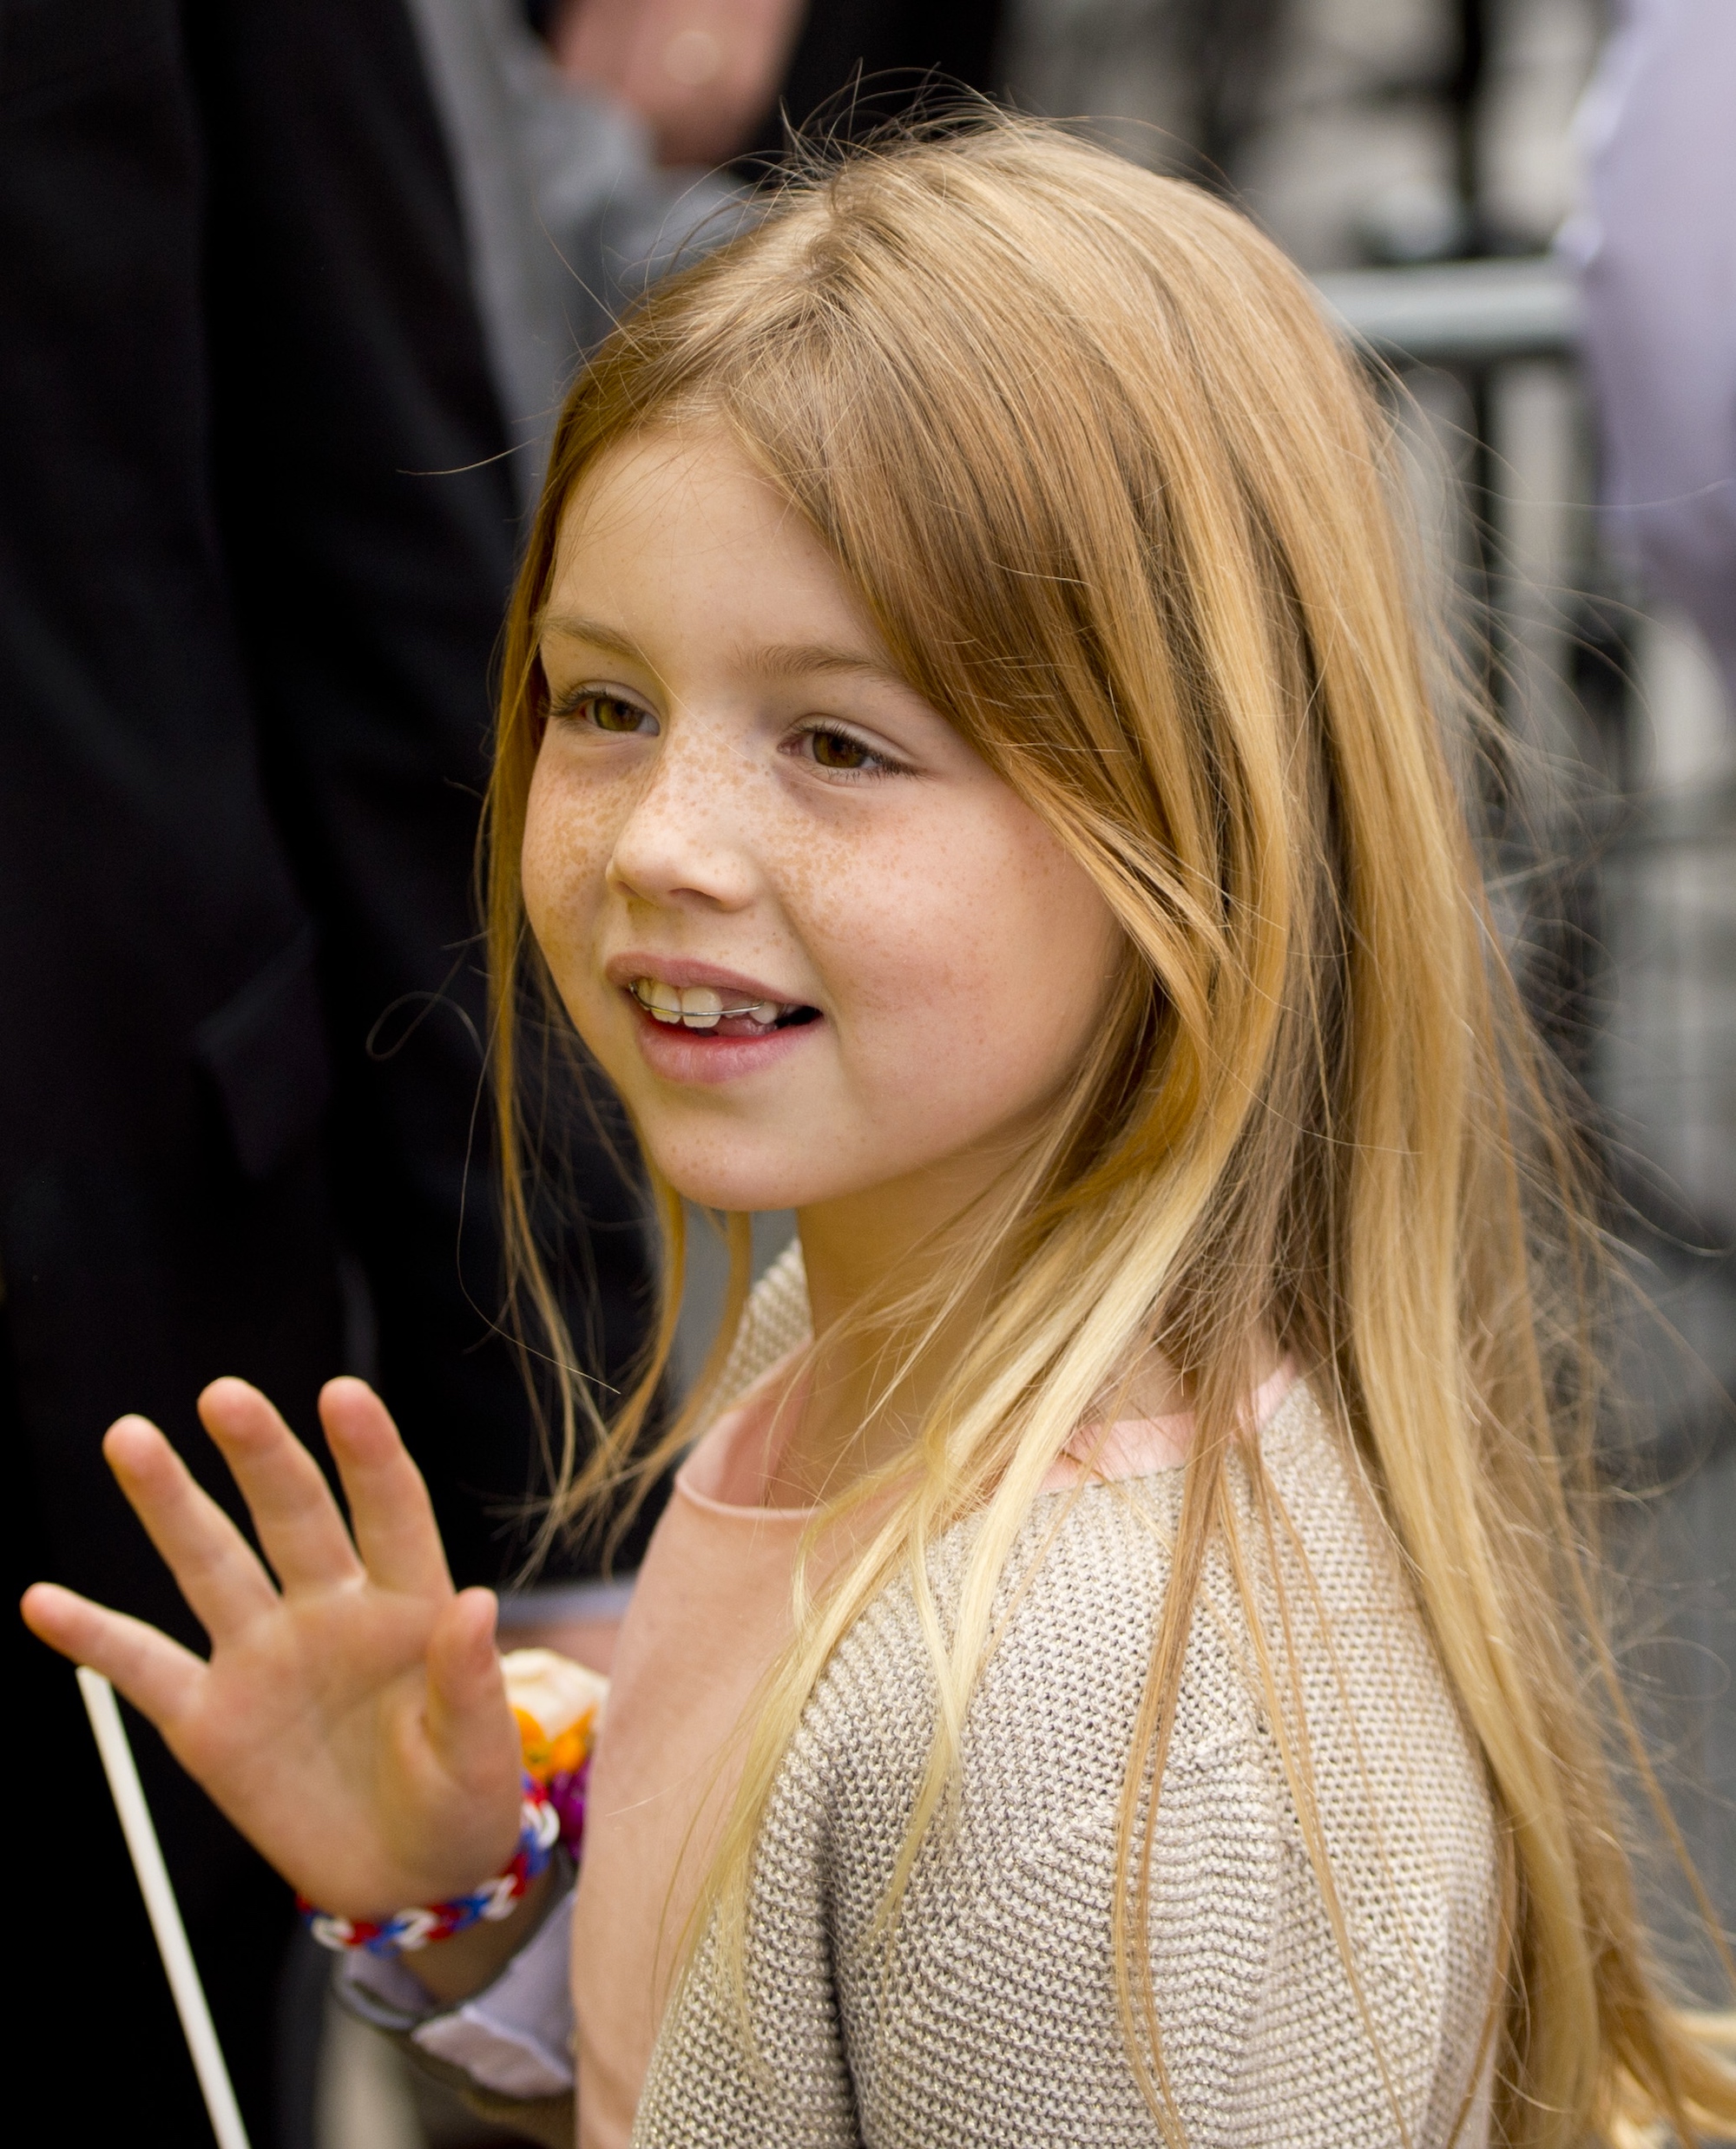 Alexia waves to the crowd on King's Day 2014.